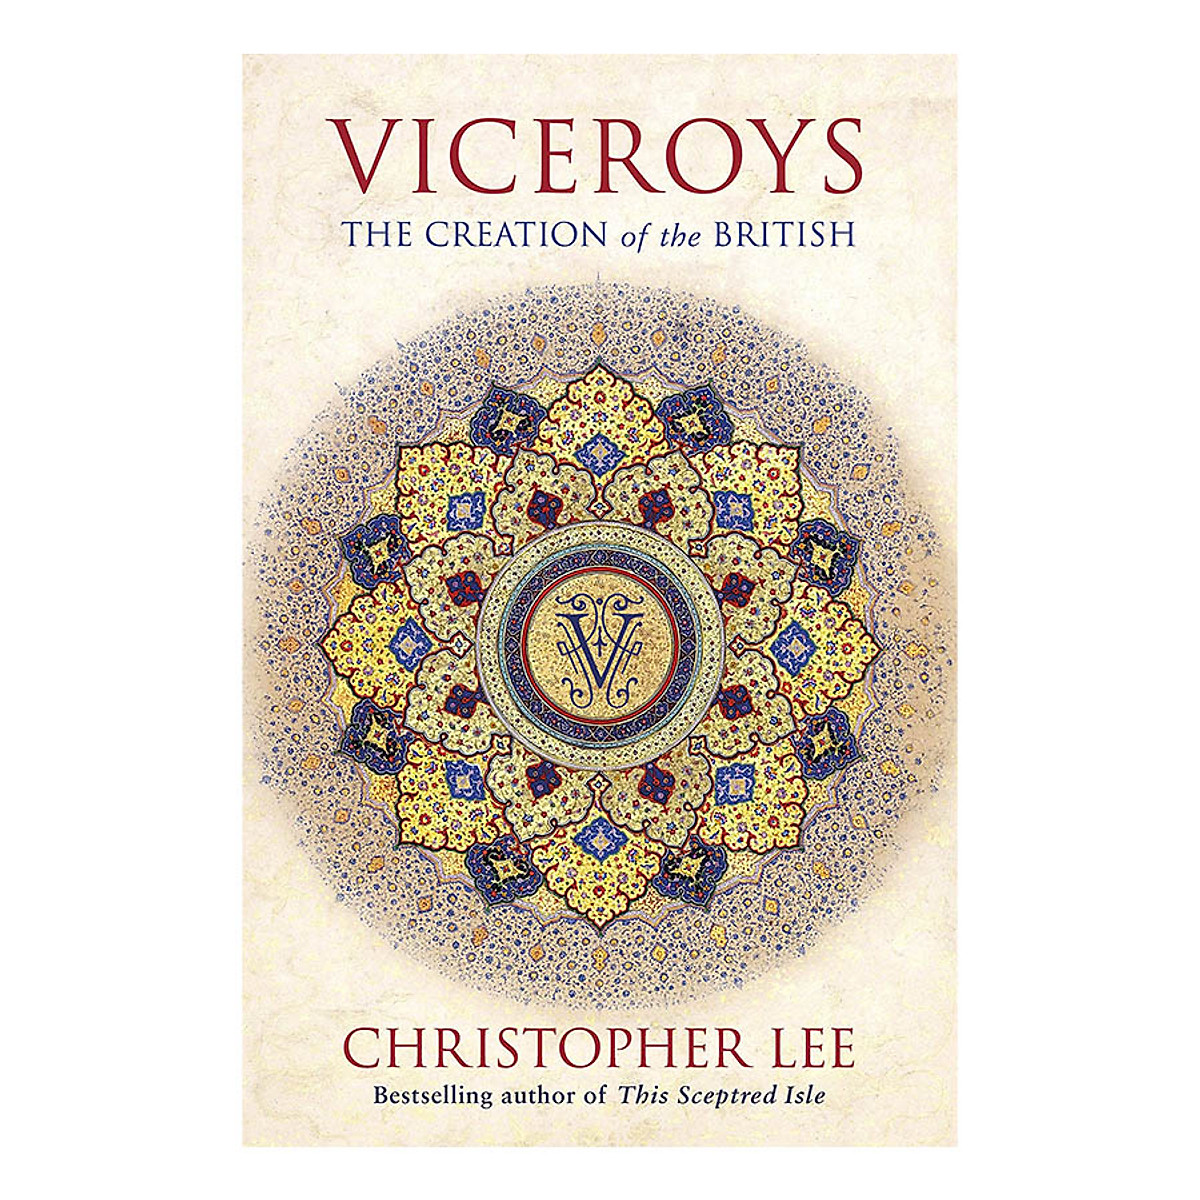 Viceroys: The Creation of the British